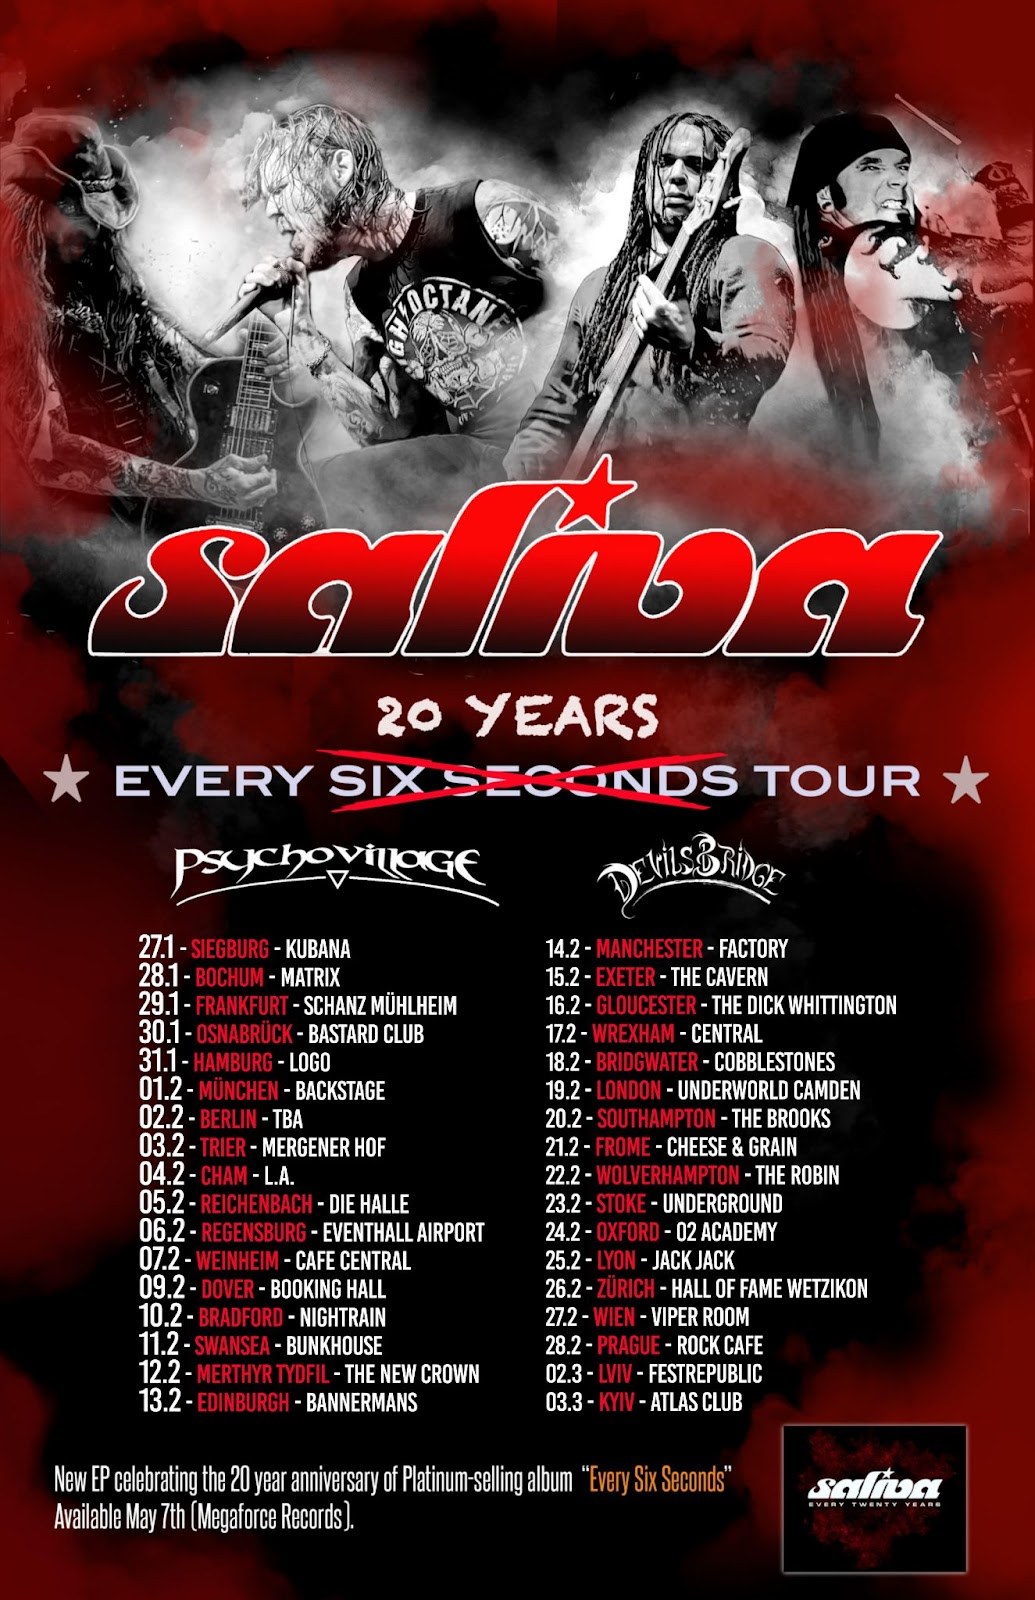 SALIVA EVERY 20 YEARS TOUR WITH SUPPORT FROM PSYCHO VILLAGE